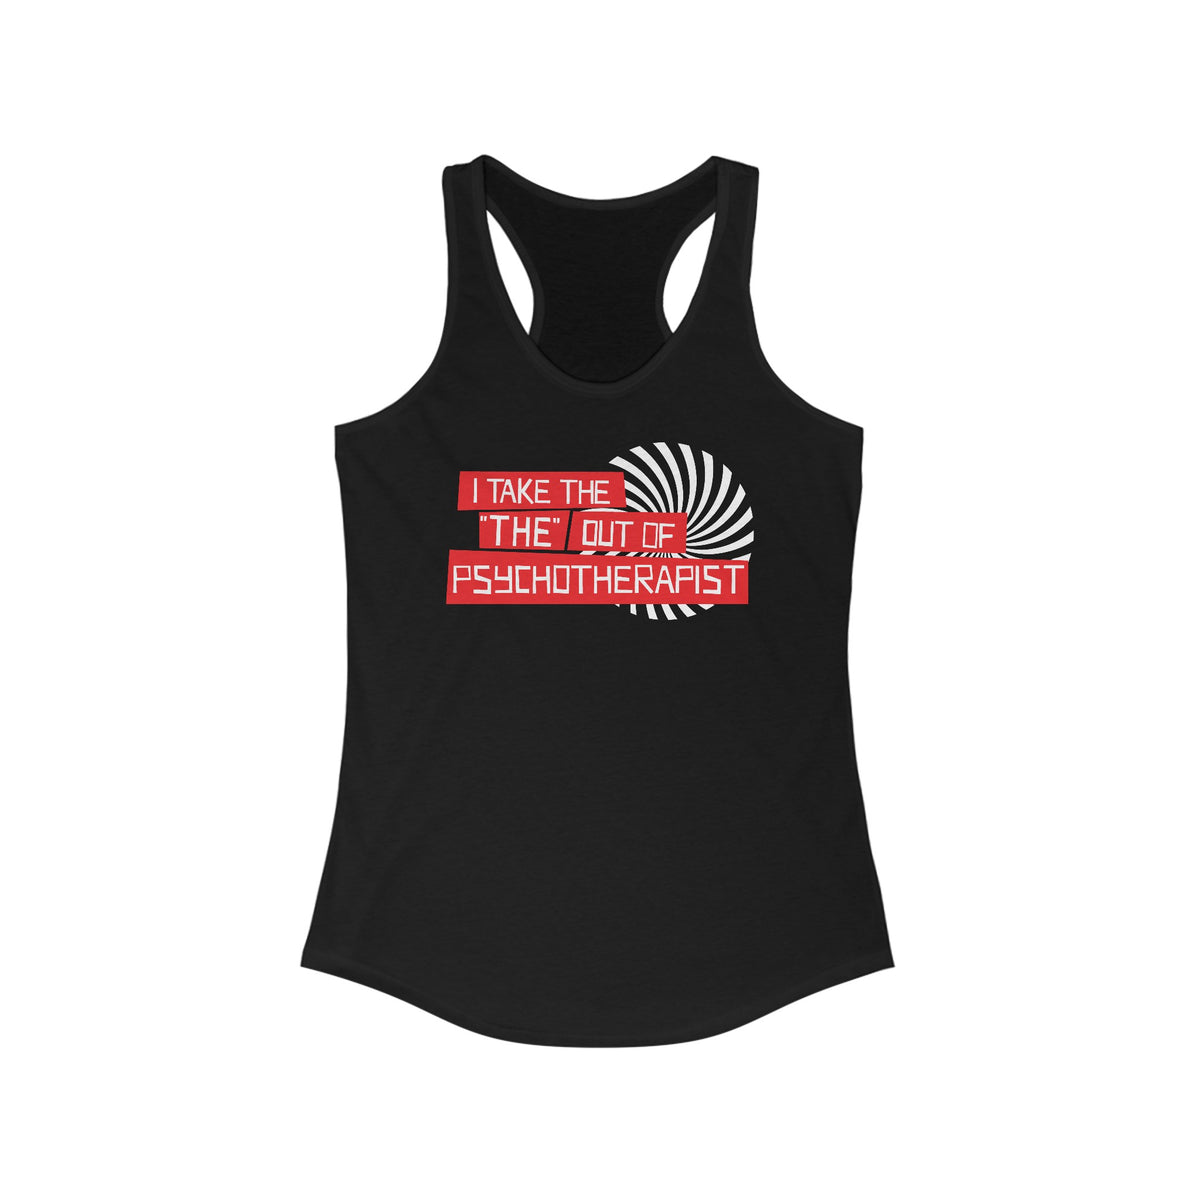 I Take The The Out Of Psychotherapist - Women’s Racerback Tank